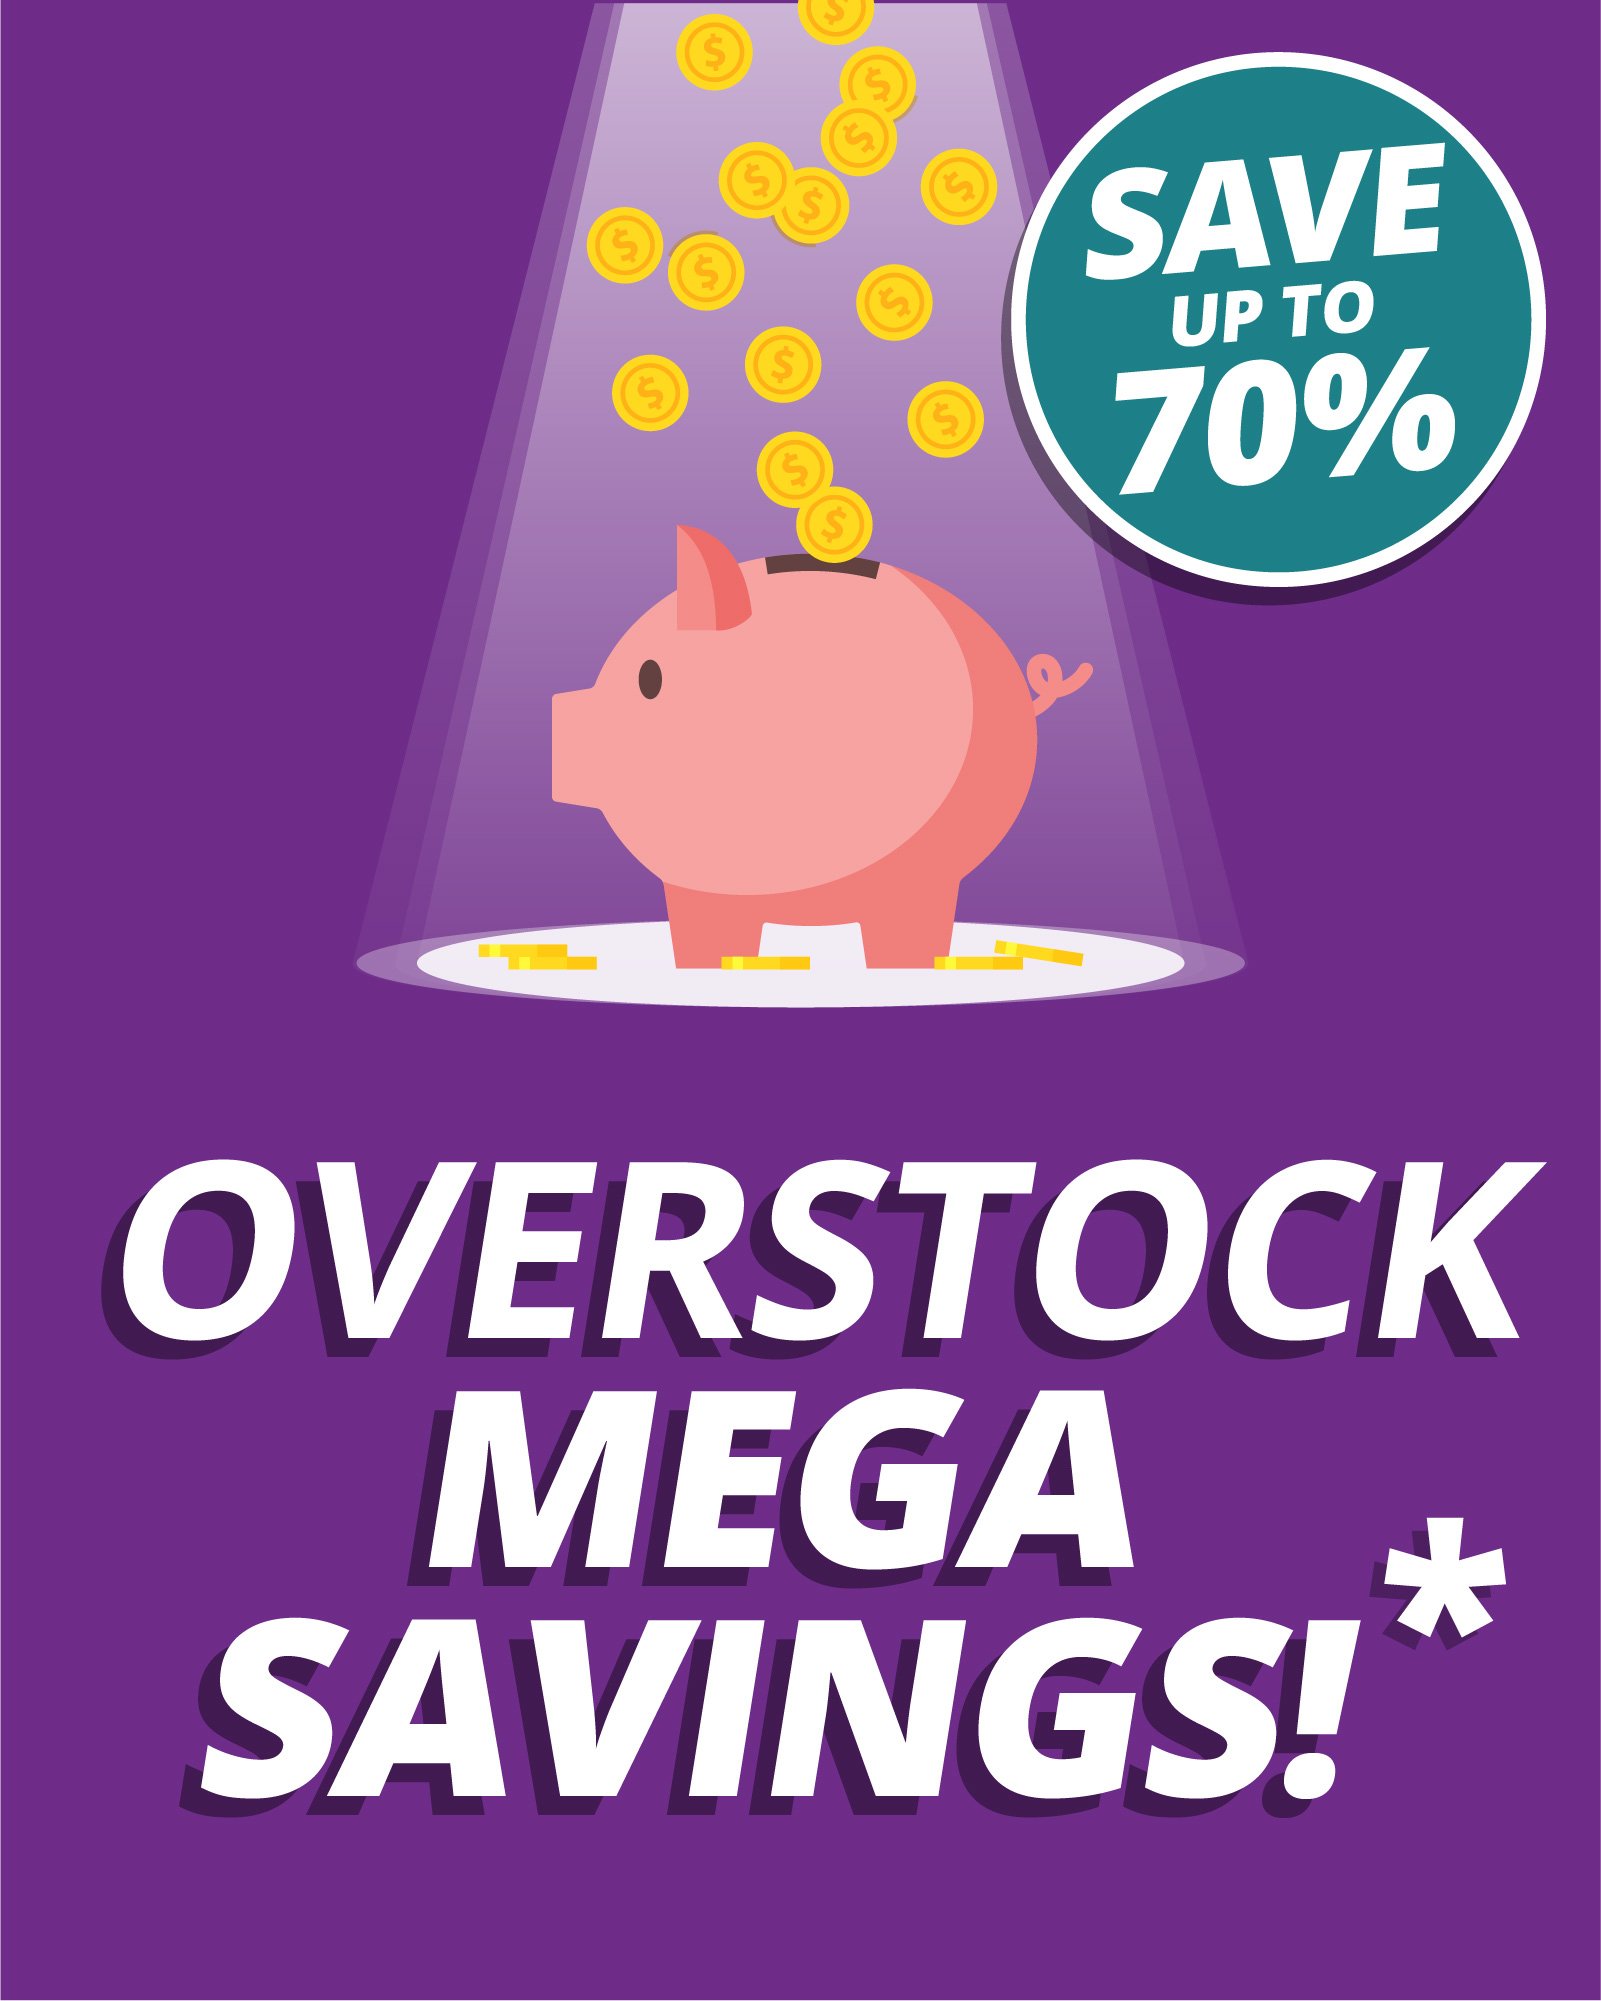 SAVE UP TO 70%